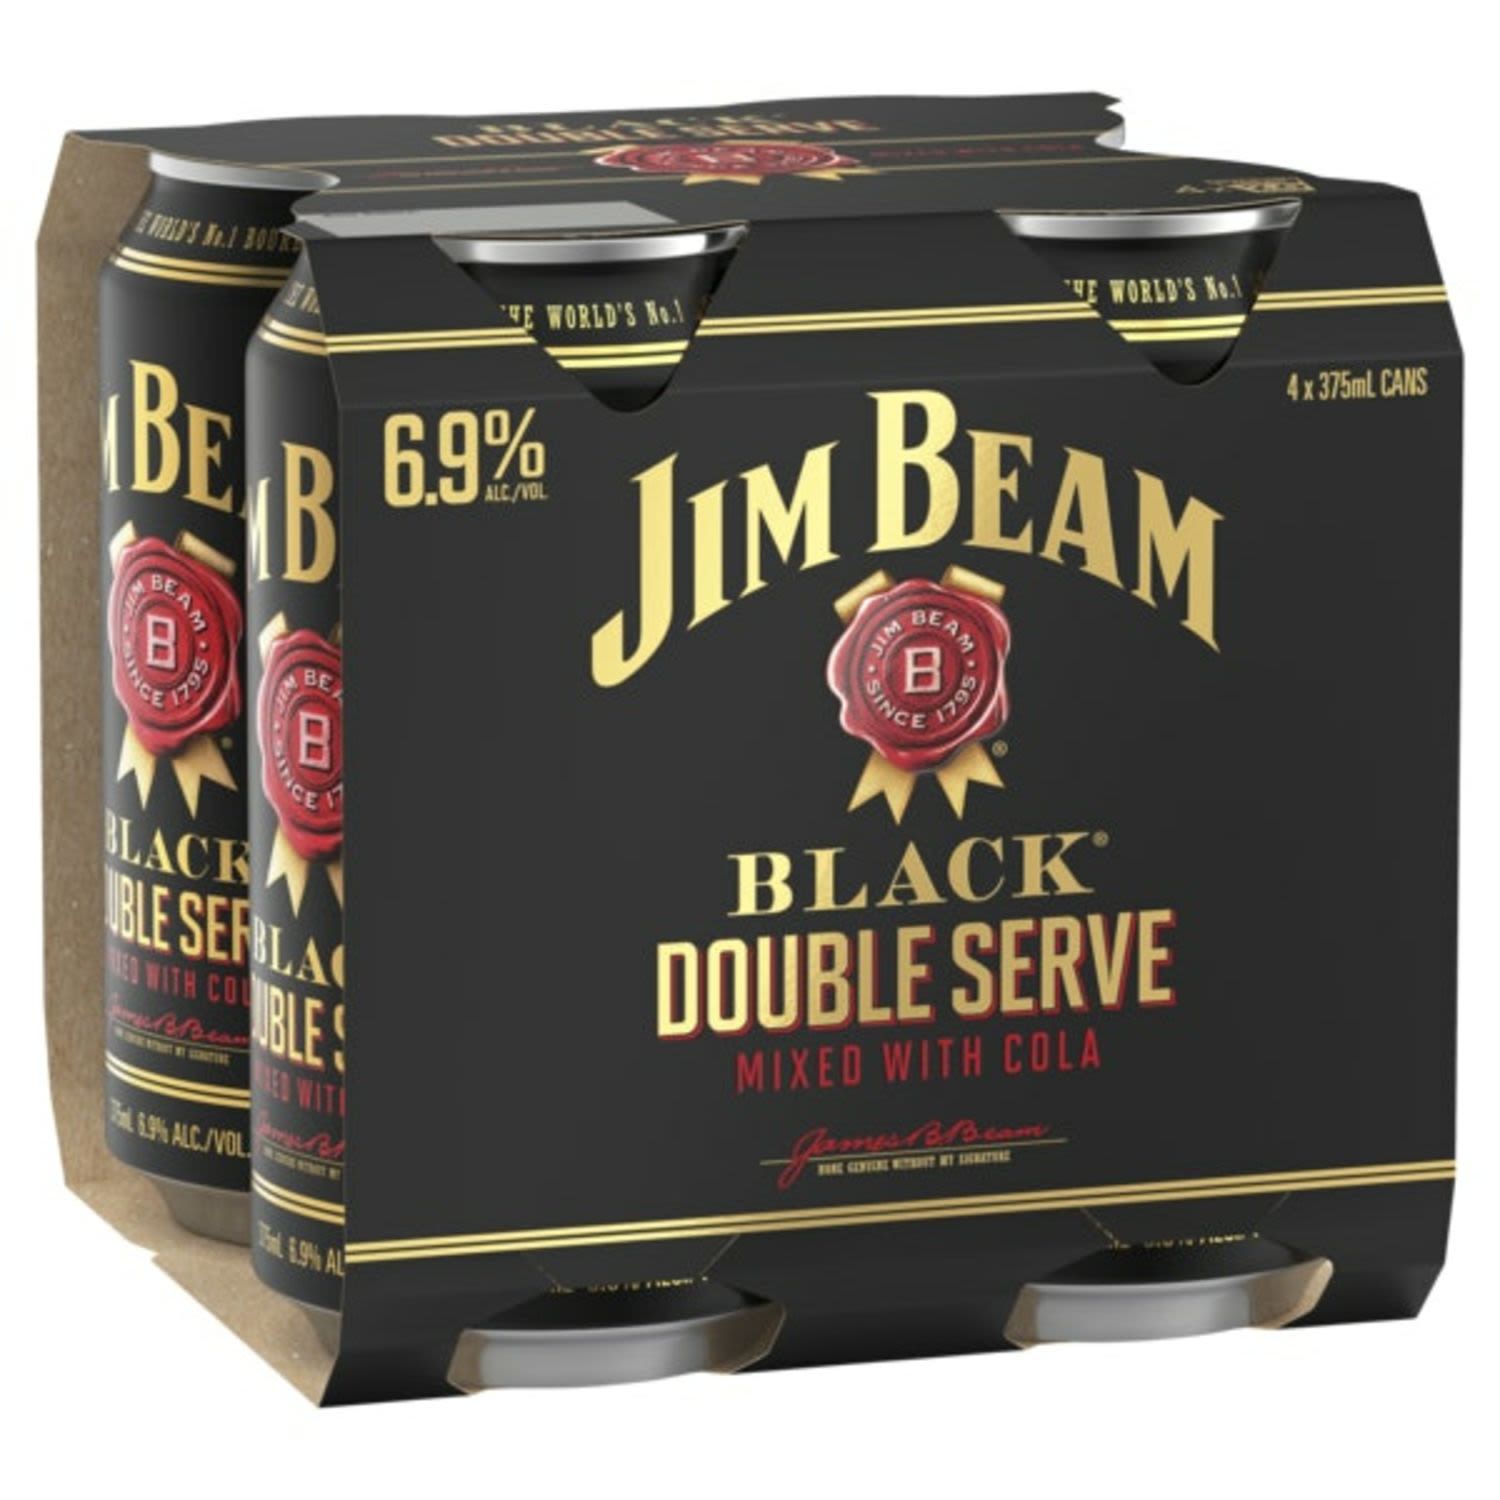 Jim Beam Black Double Serve delivers two servings of the premium, extra-aged Jim Beam Black Bourbon you love, pre-mixed with quality cola.<br /> <br />Alcohol Volume: 6.90%<br /><br />Pack Format: 4 Pack<br /><br />Standard Drinks: 2.1<br /><br />Pack Type: Can<br />